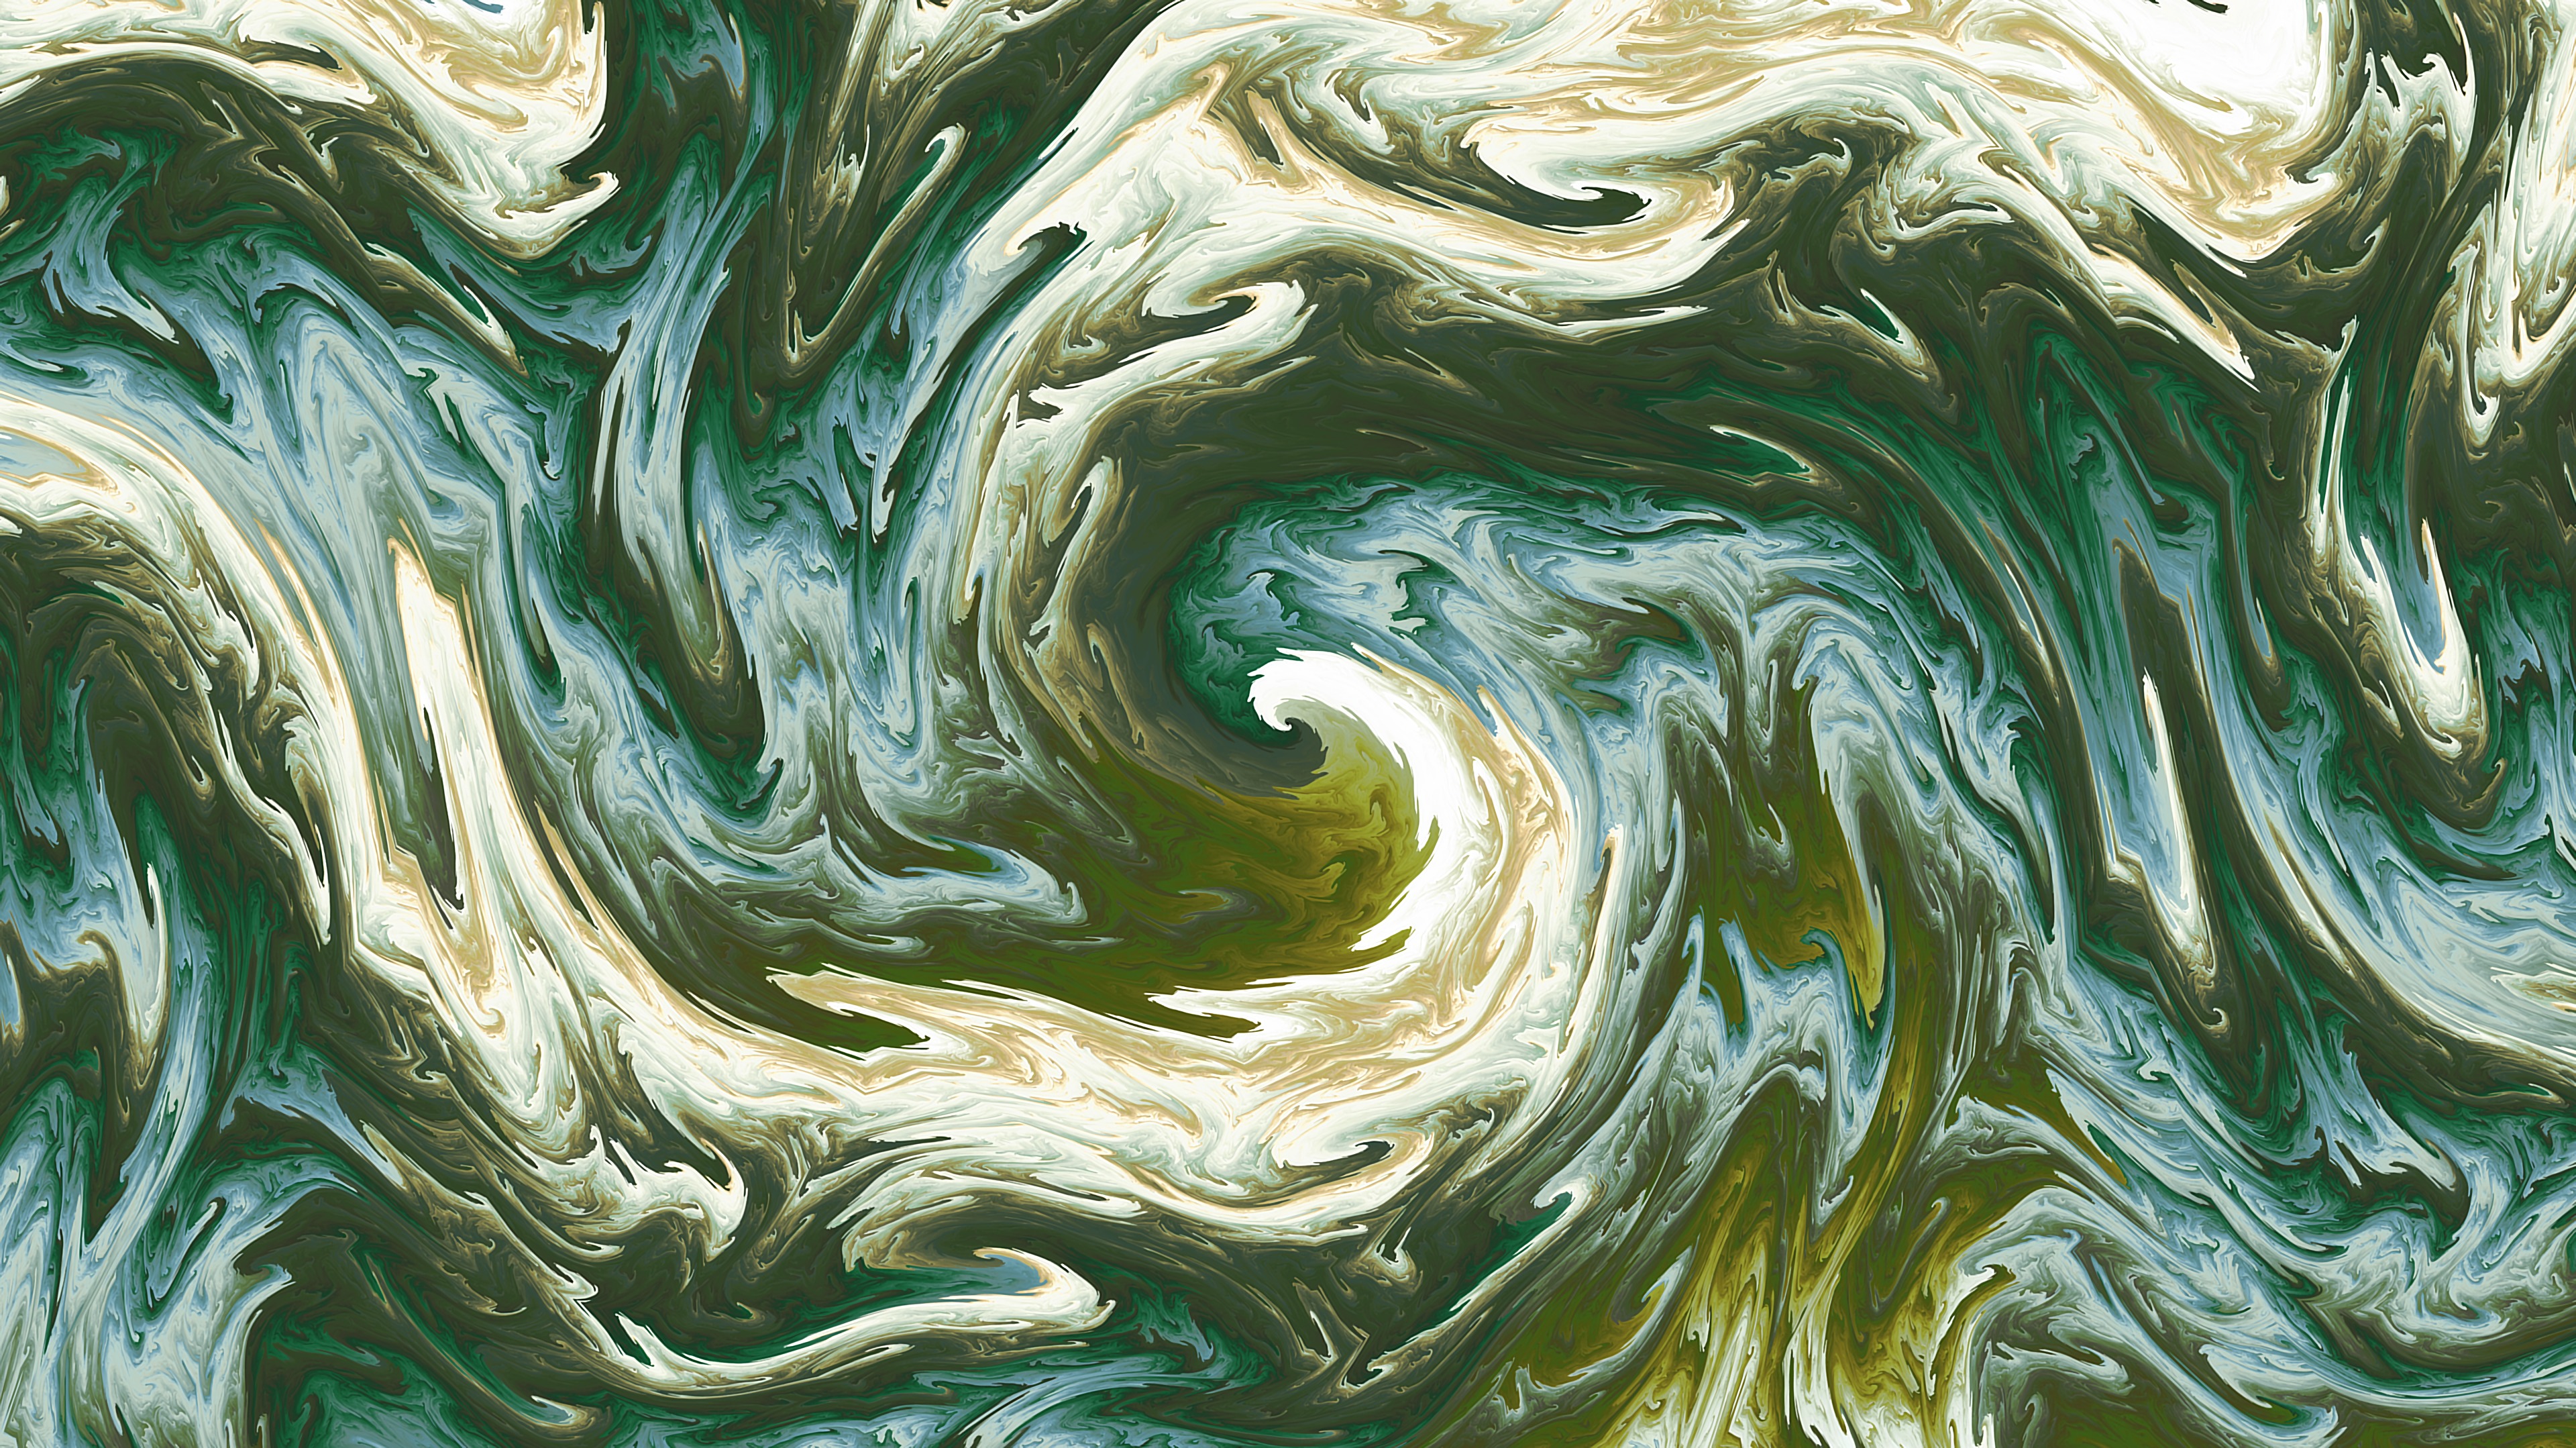 fractal, mixing, abstract, wavy, swirling, involute